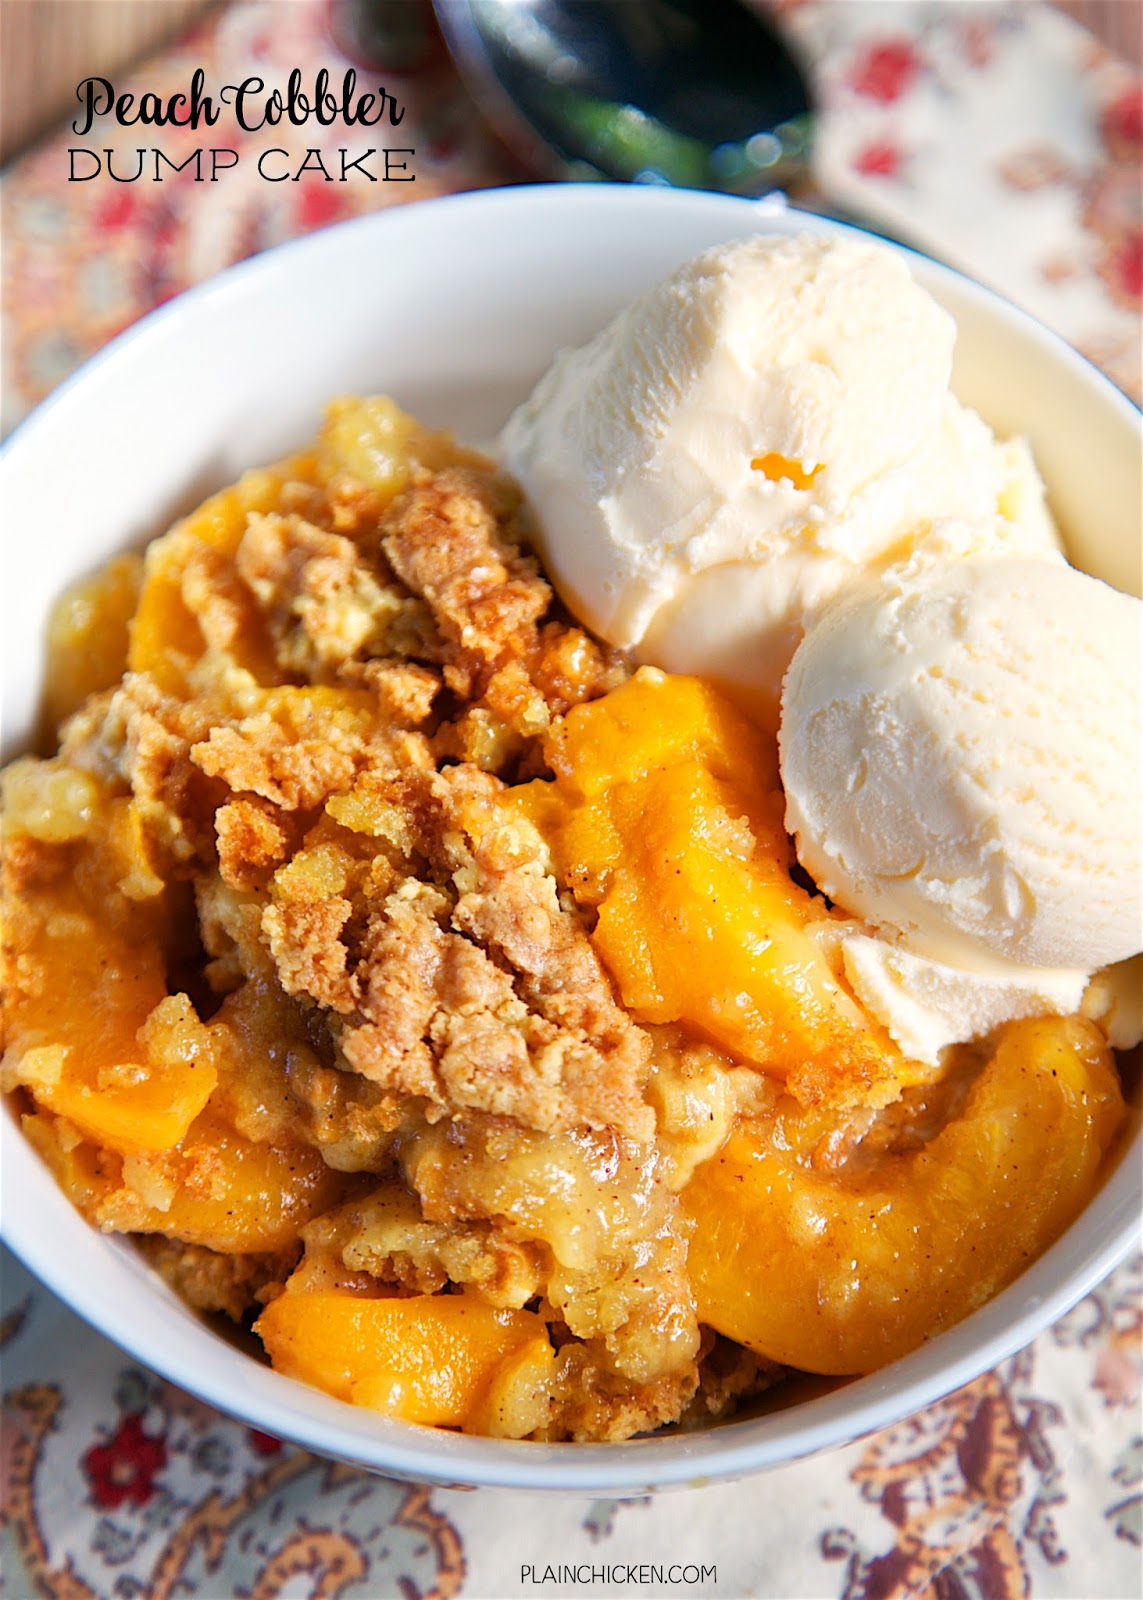 Peach Cobbler Dump Cake - only 4 ingredients for the most delicious dessert ever! LOVE this!!! Literally takes a minute to make and everyone loved it. There were no leftovers! Serve warm with some vanilla ice cream. YUM!